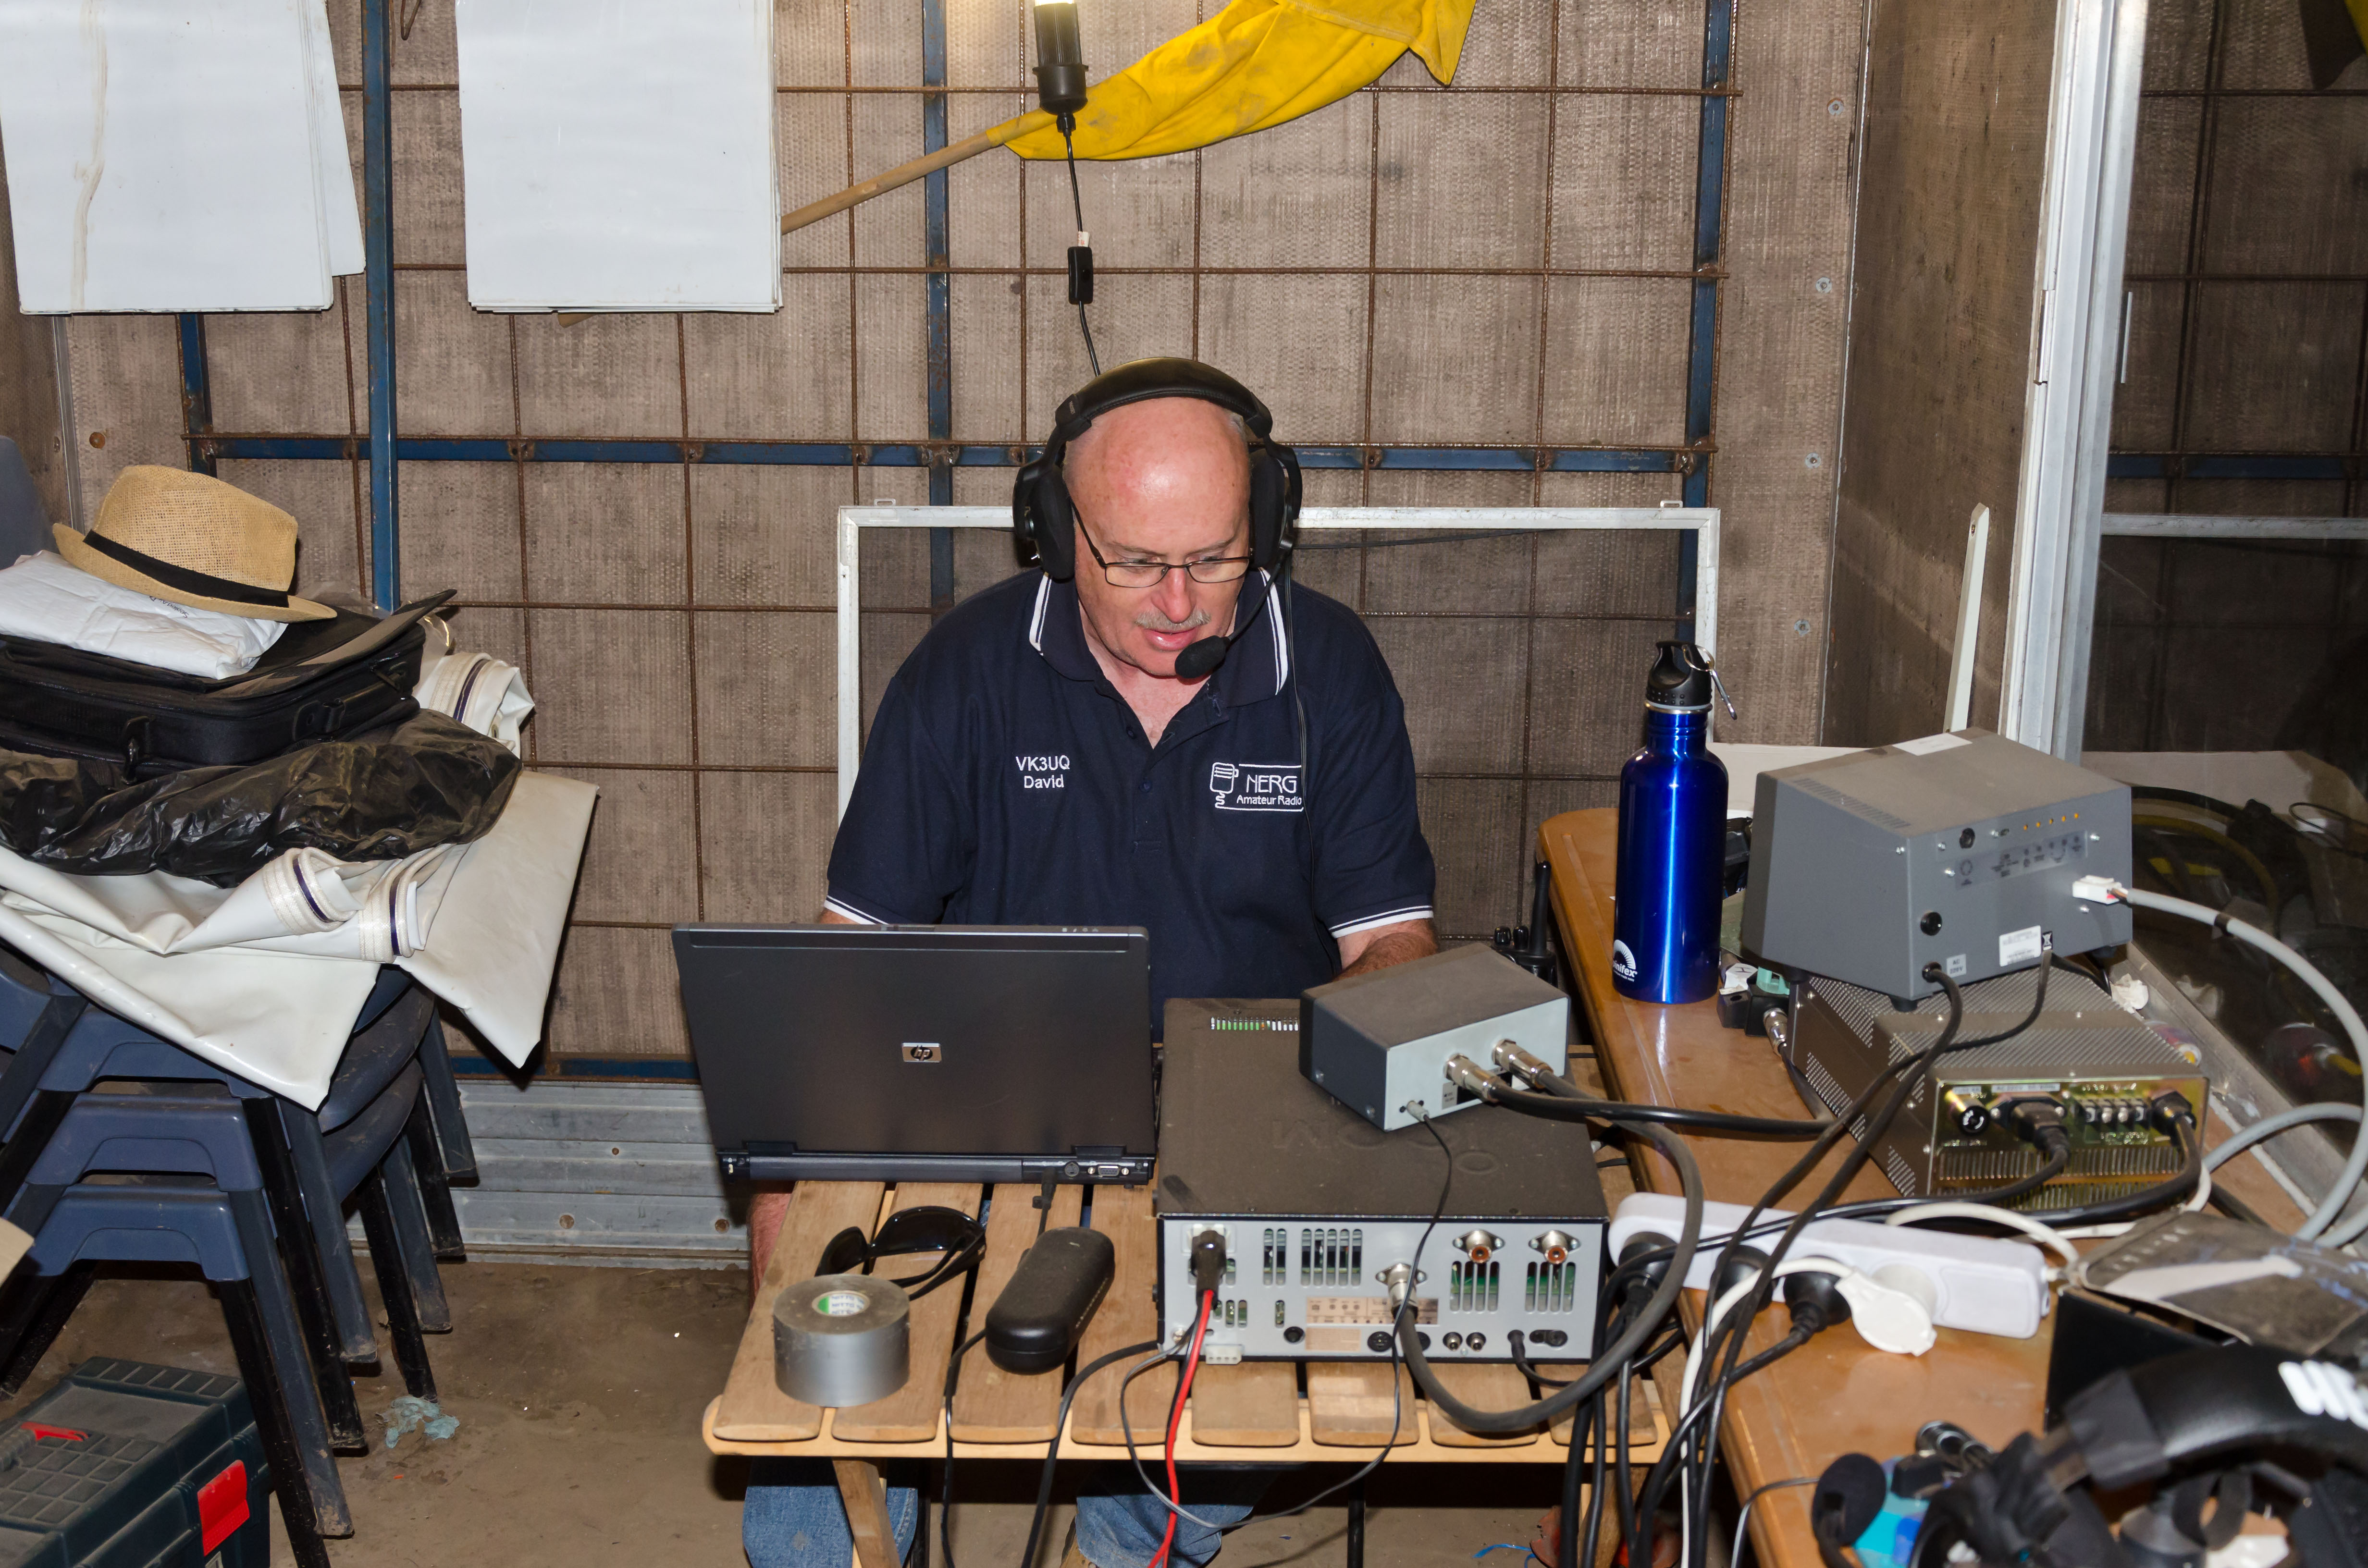 A man wearing a headset operating a radio and computer.